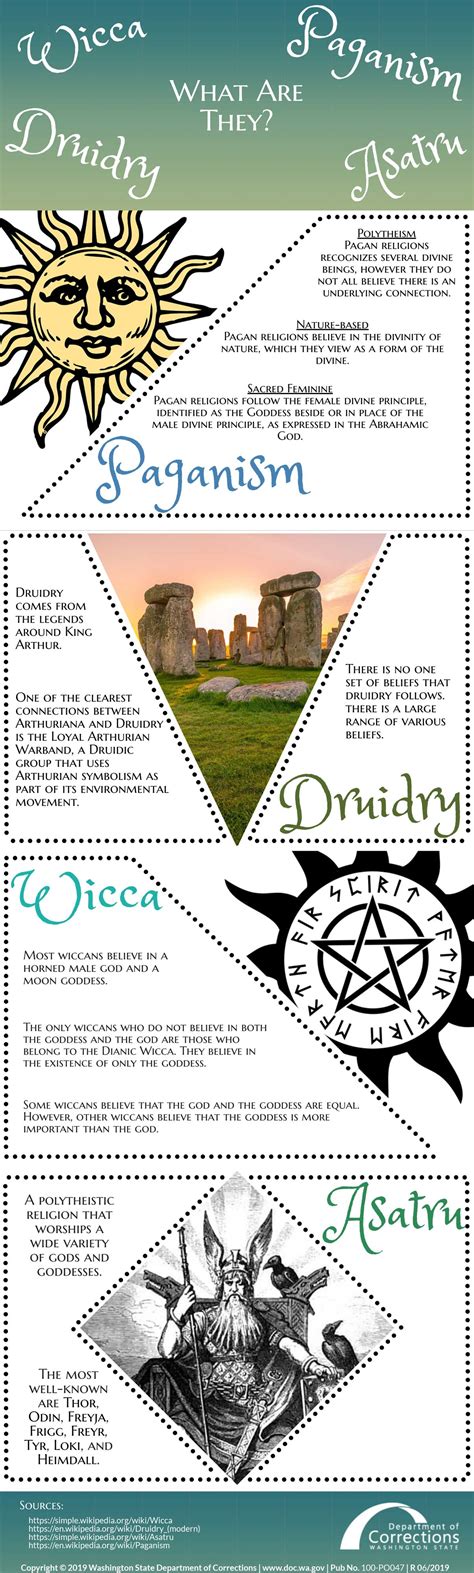 Infographic Wicca Druidry Paganism Asatru What Are They